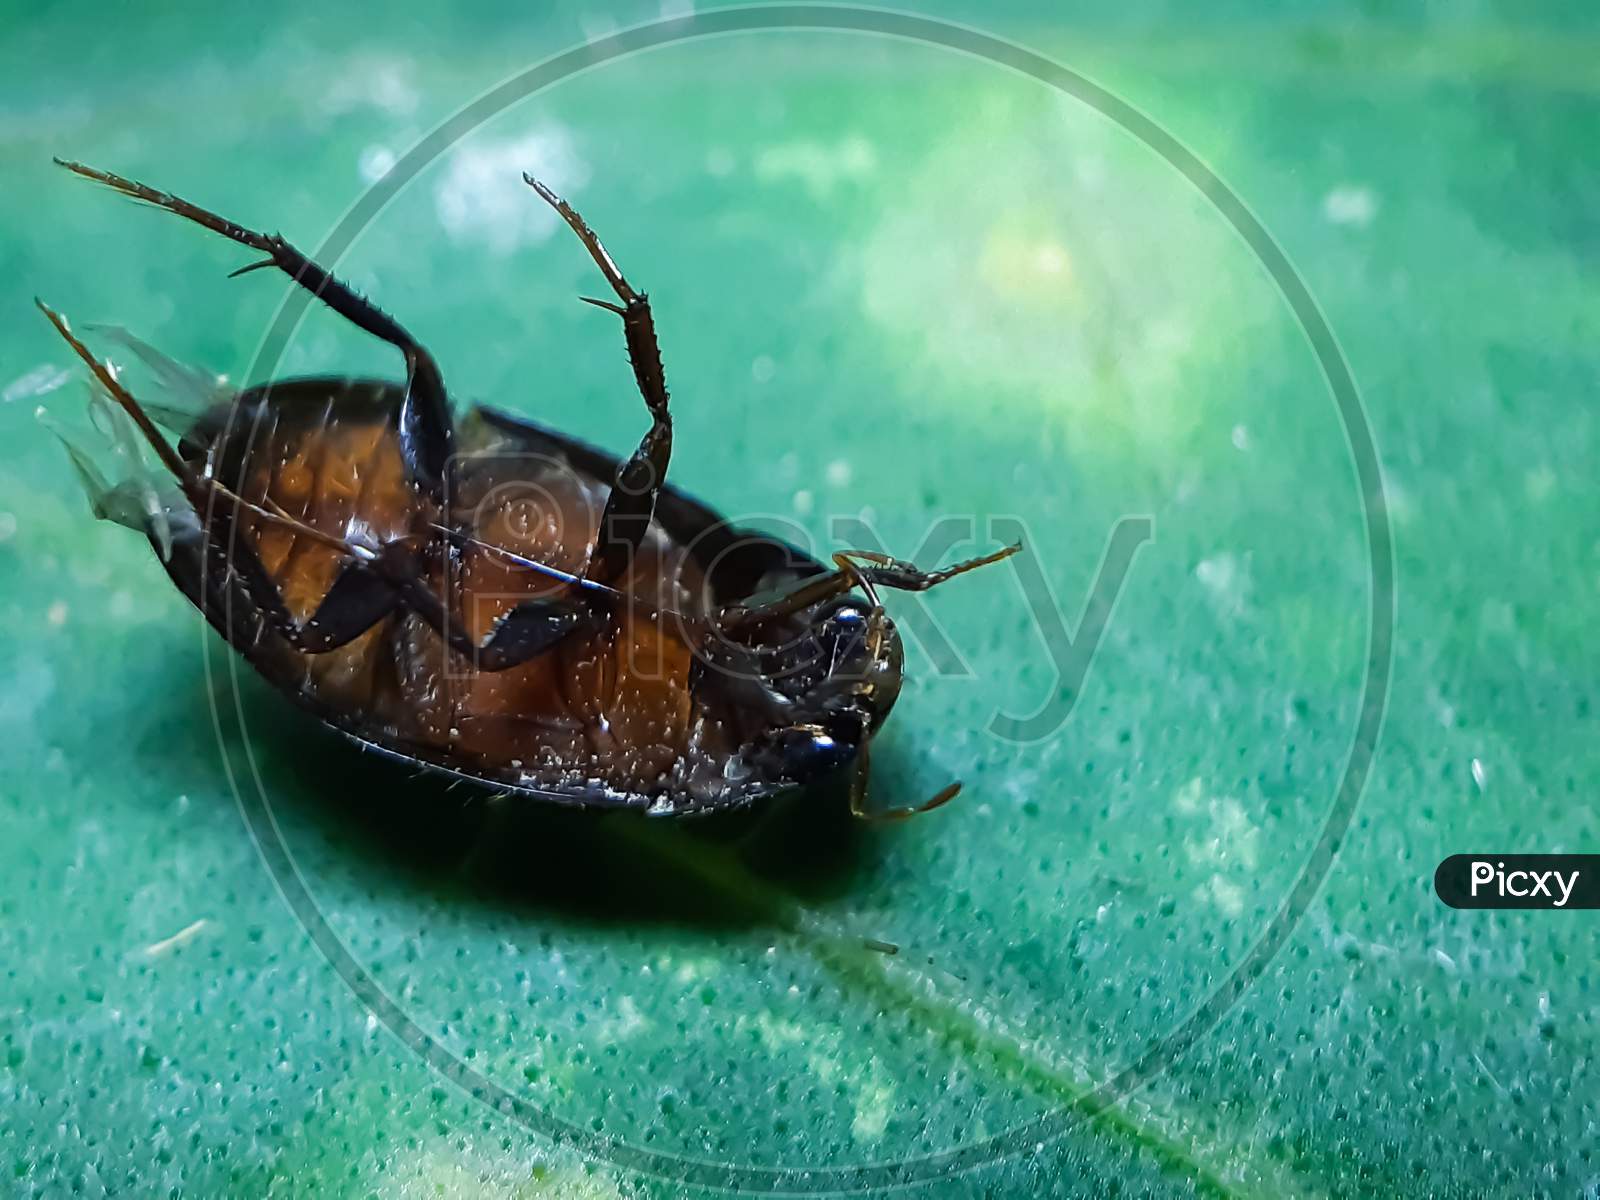 A Black Cockroach Is Lying Dead On The Green Leaves And Has A Green Background.